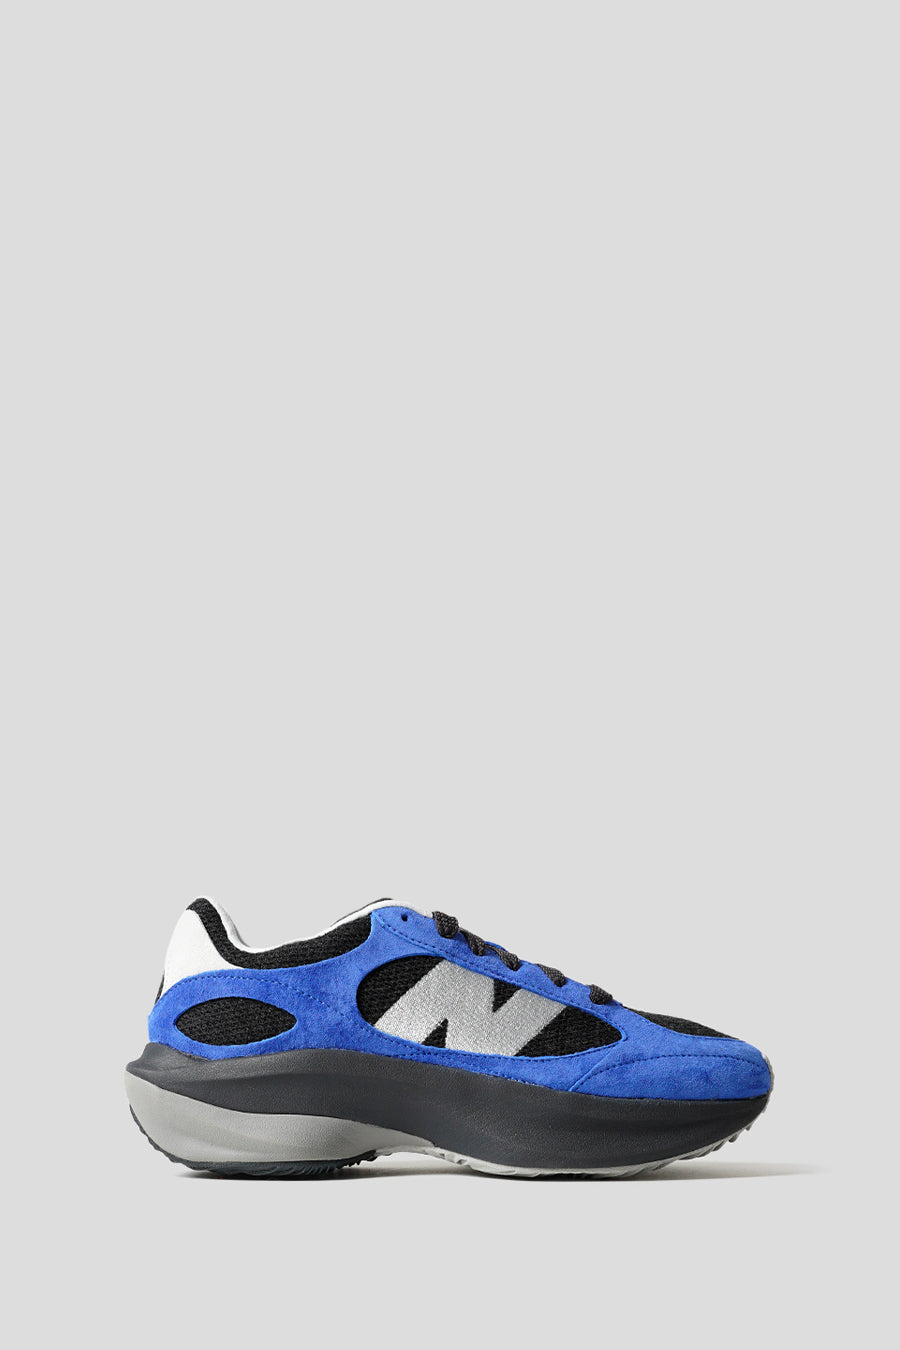 NEW BALANCE - WRPD RUNNER NAVY BLUE AND PHANTOM SNEAKERS - LE LABO STORE